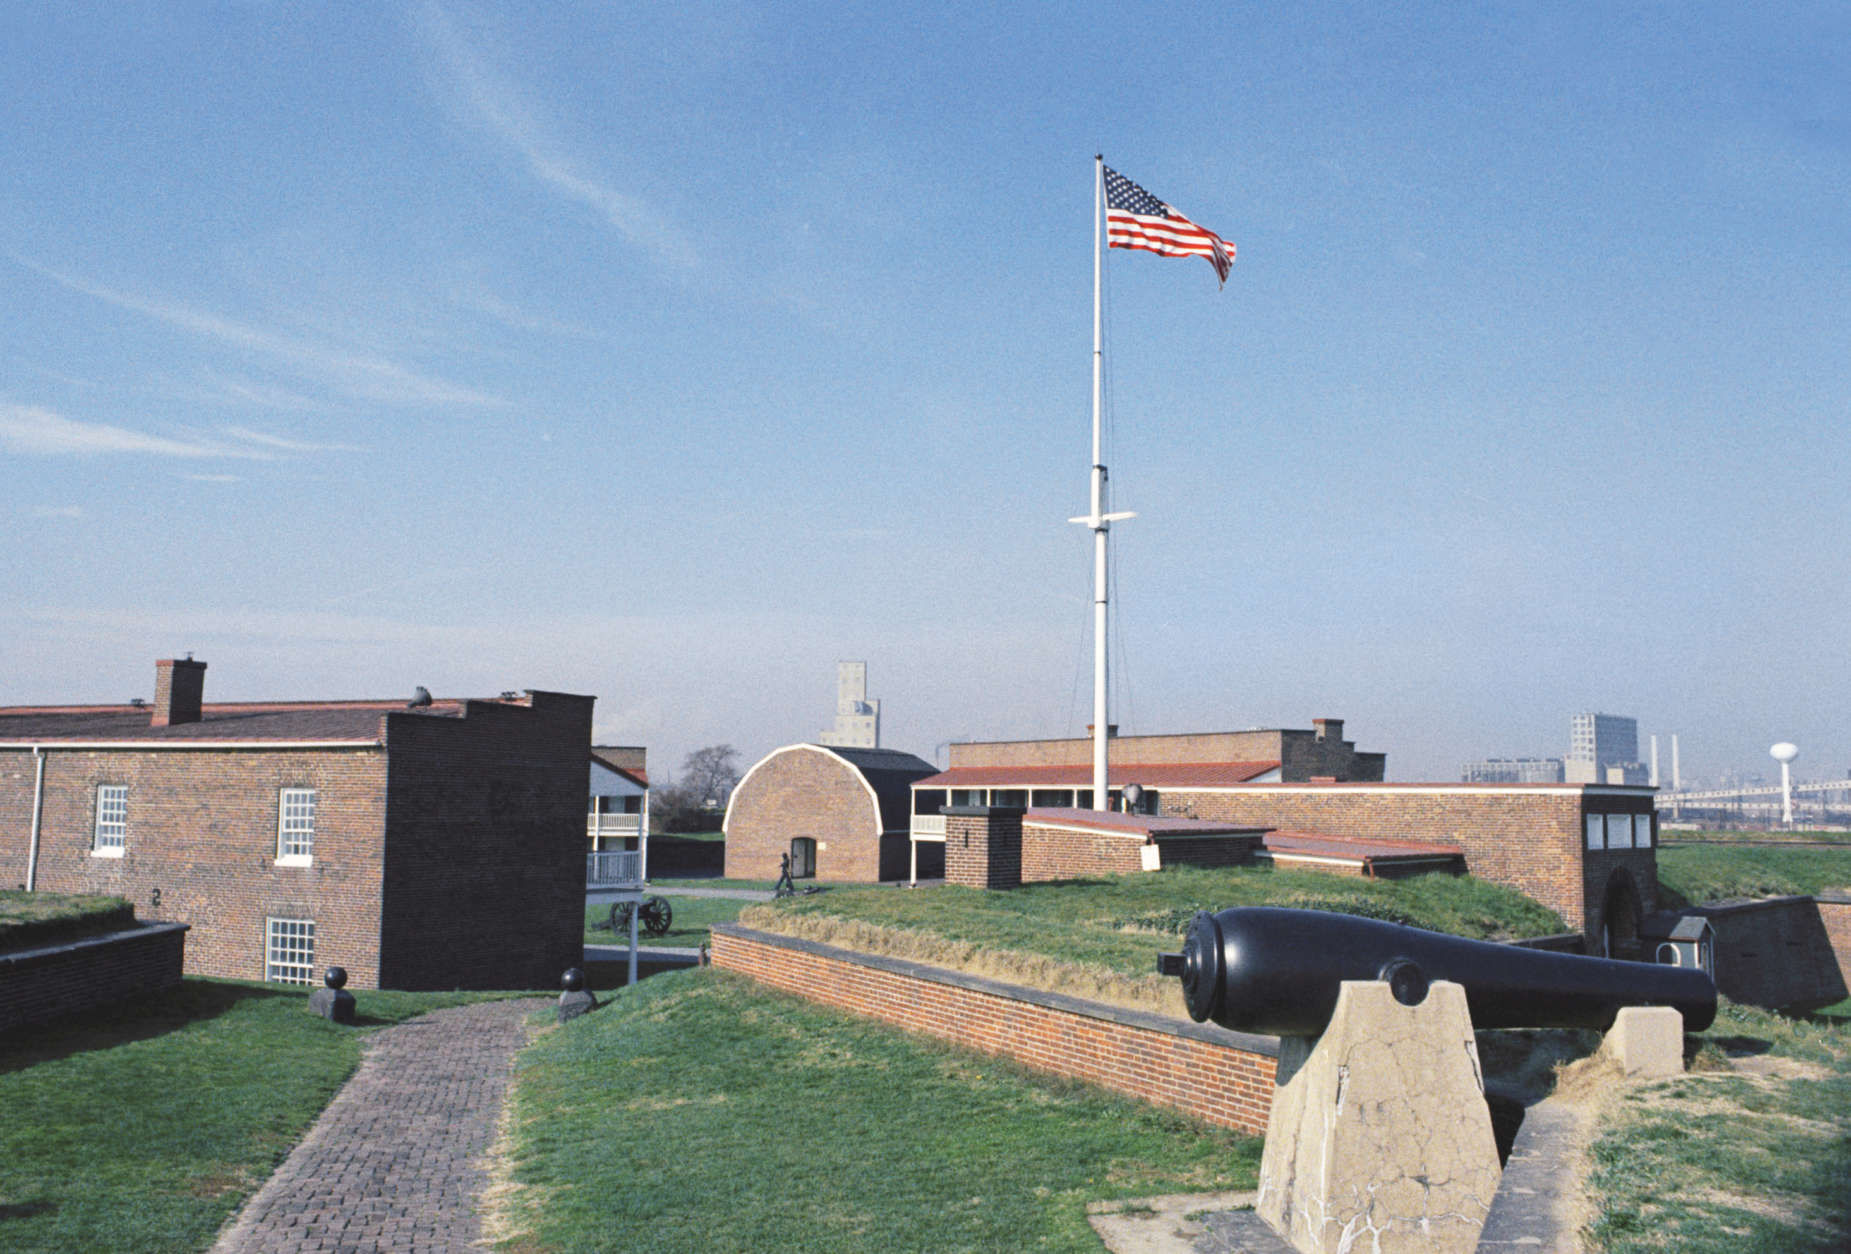 FILE - In this undated image, a flag flies at Fort McHenry in Baltimore, Md., where Francis Scott Key wrote "The Star-Spangled Banner," and shot off the cannon which defended the city against the British in an undated photo. (AP Photo, File)